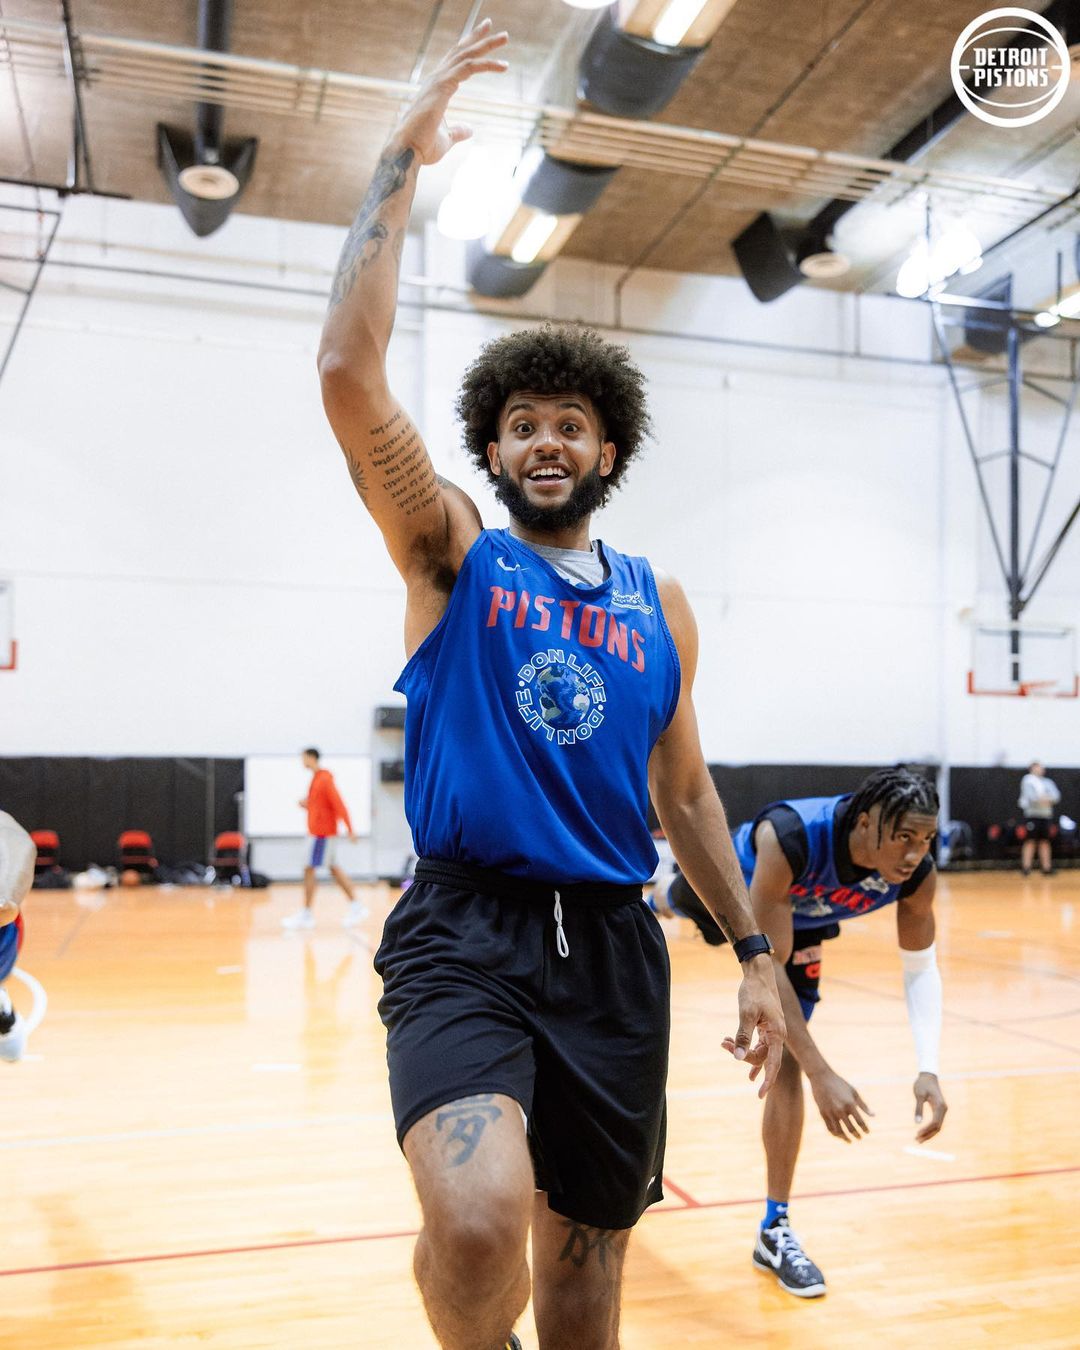 Caught some vibes at practice.  @allegiant | @nbasummerleague...